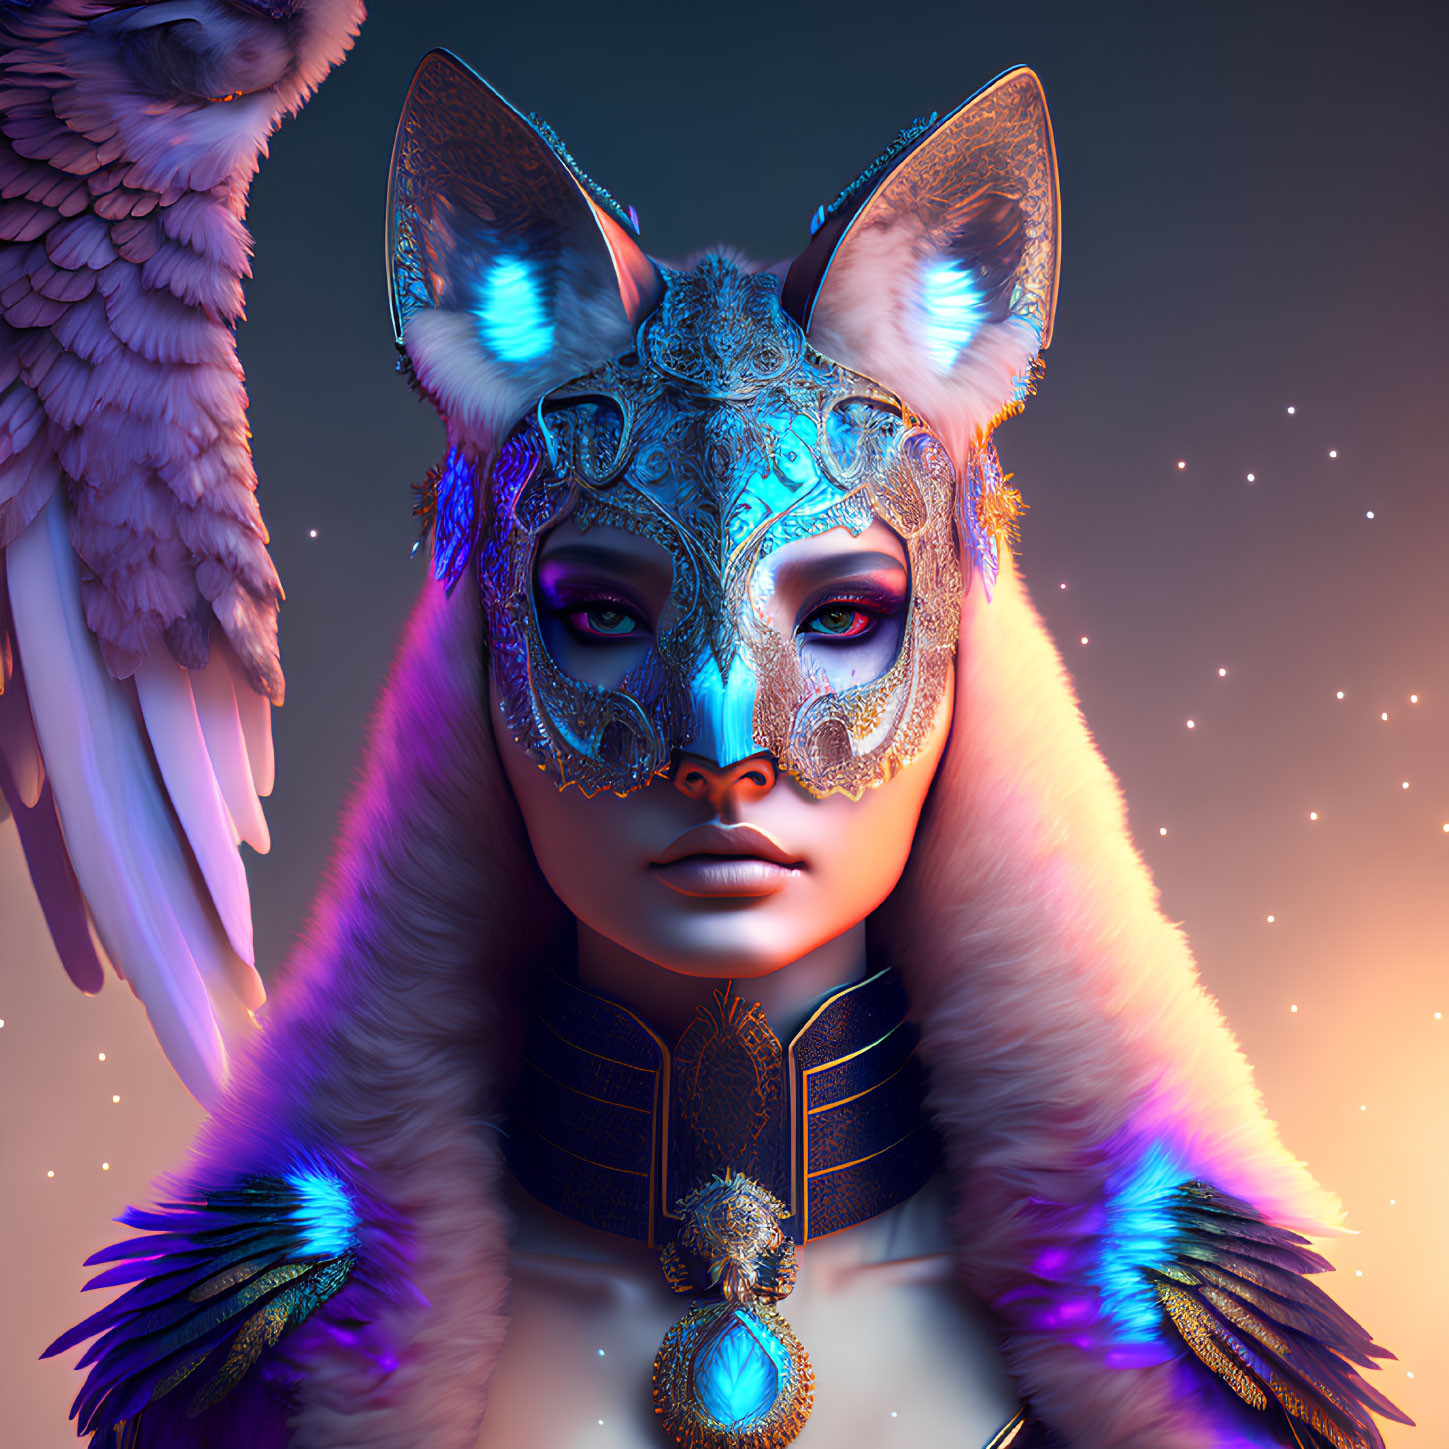 Intricate Blue Fox Mask with Parrot on Starry Background